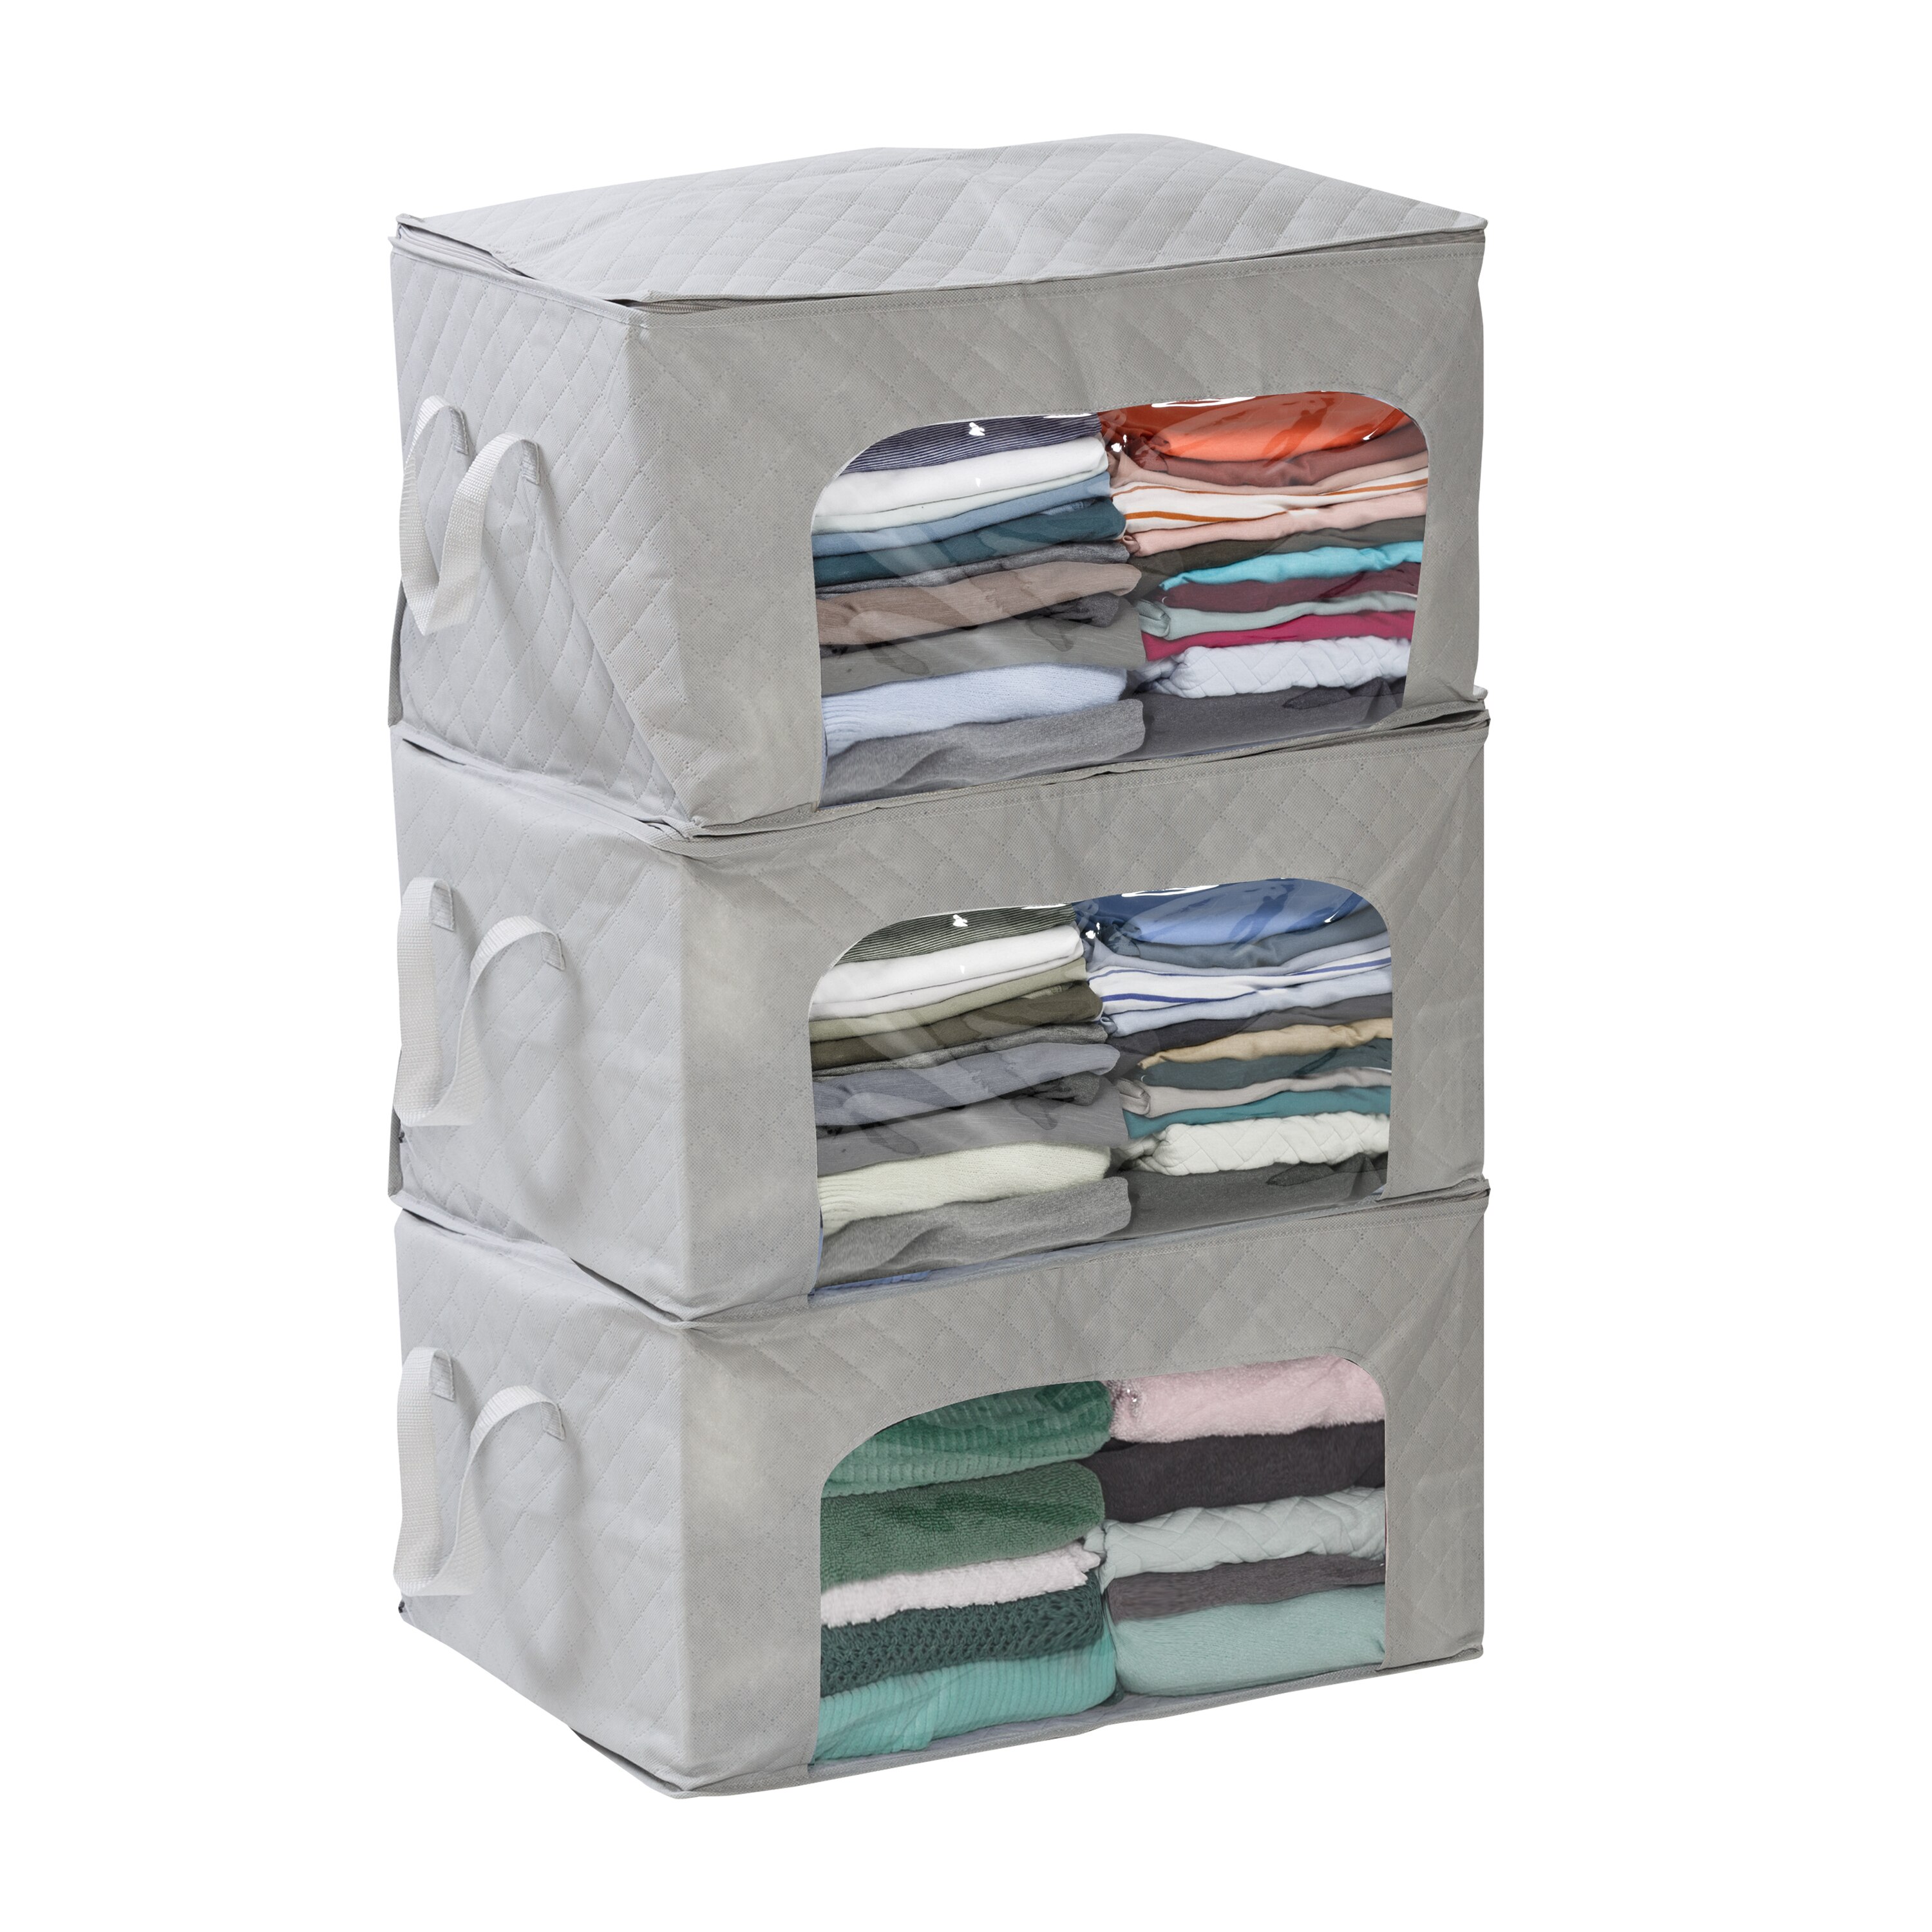 Set of 3 Grey Storage Bags with Handles and Clear-View Windows